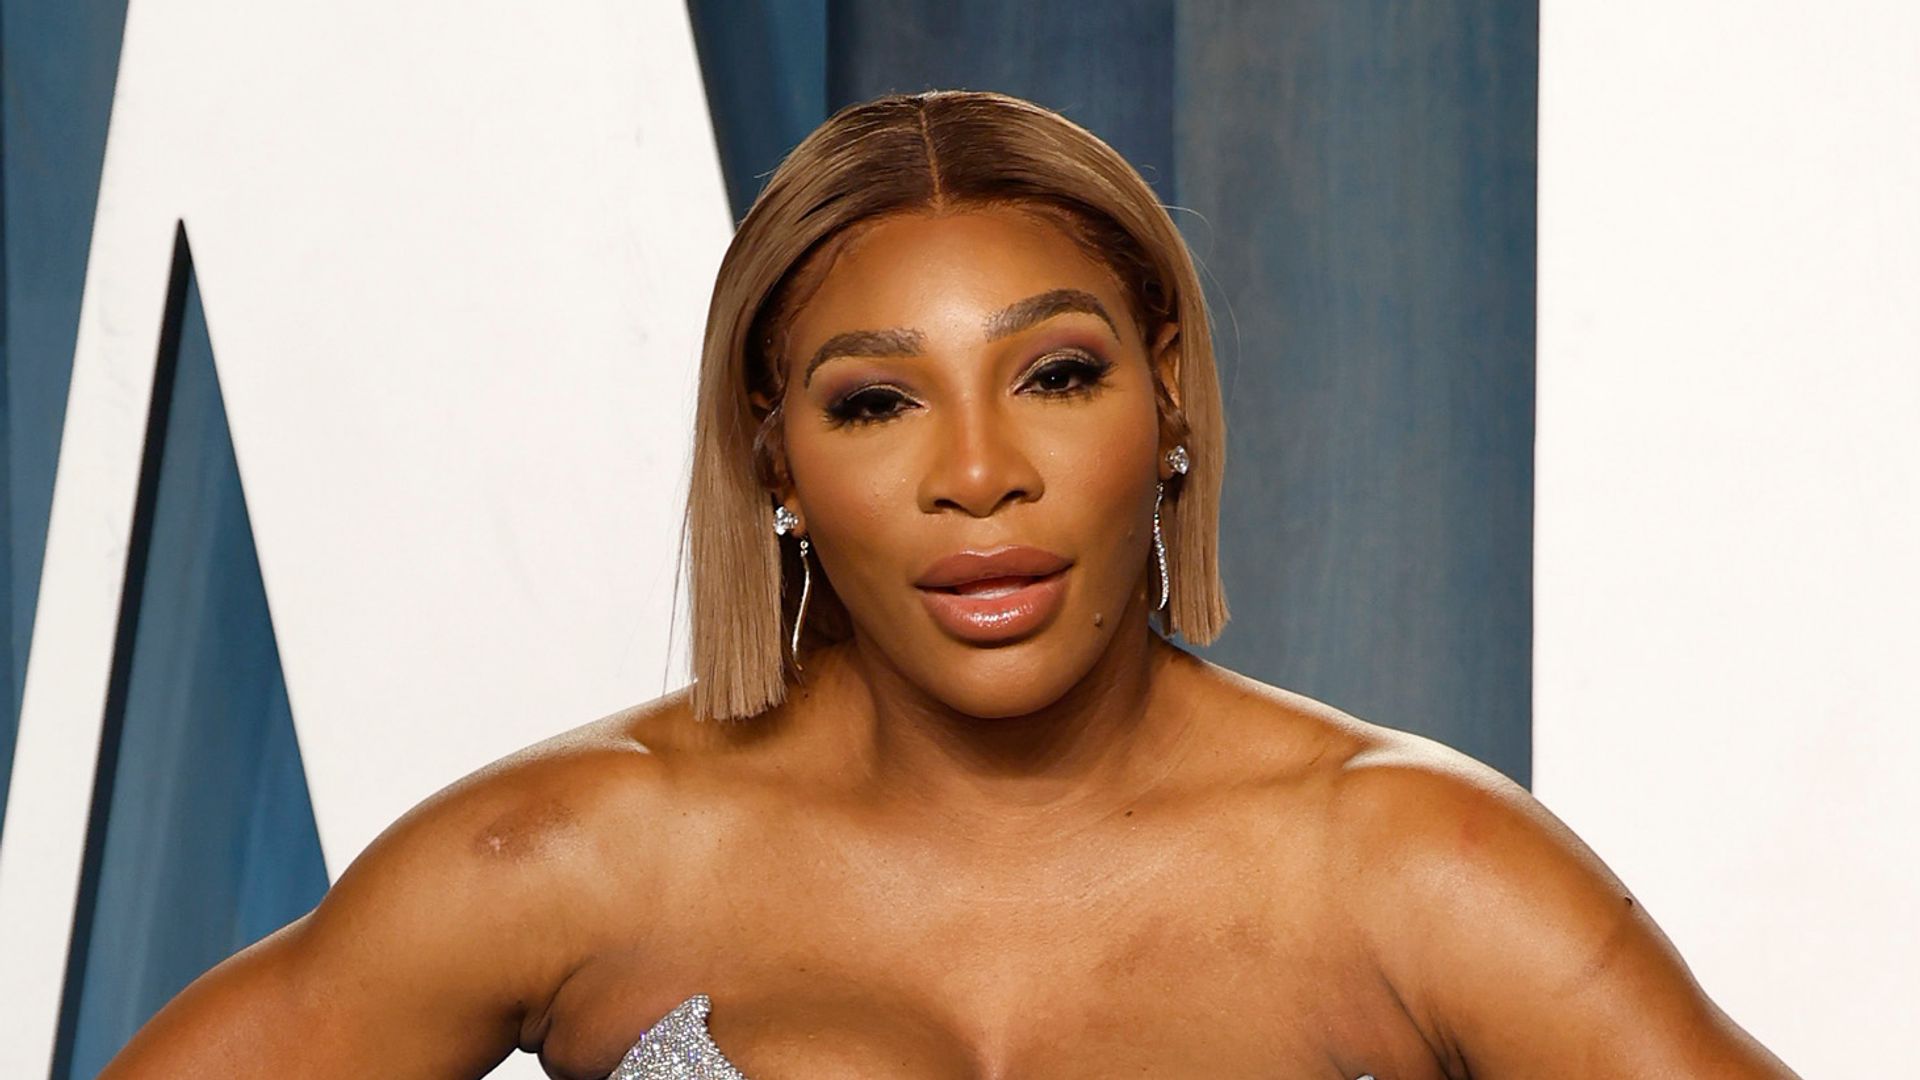 Serena Williams attends the 2022 Vanity Fair Oscar Party hosted by Radhika Jones at Wallis Annenberg Center for the Performing Arts on March 27, 2022 in Beverly Hills, California.